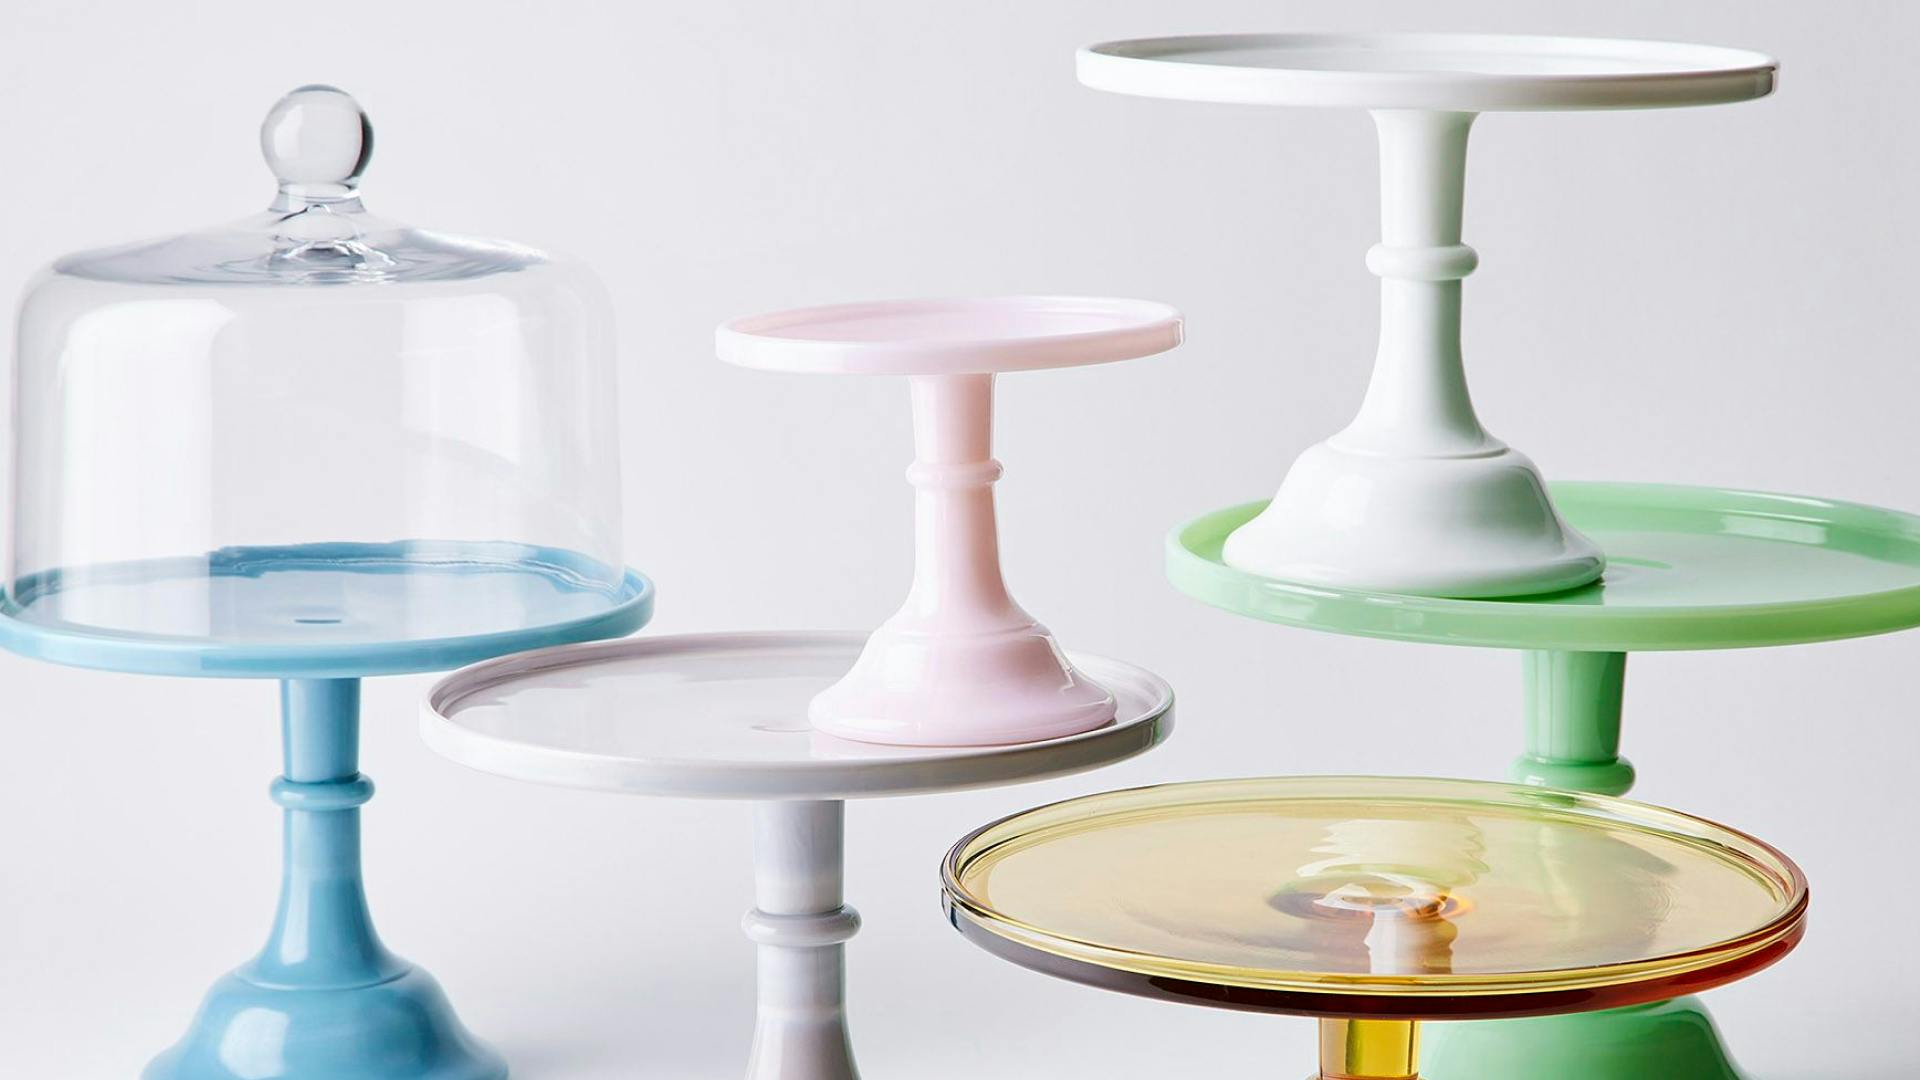 colored cake stands